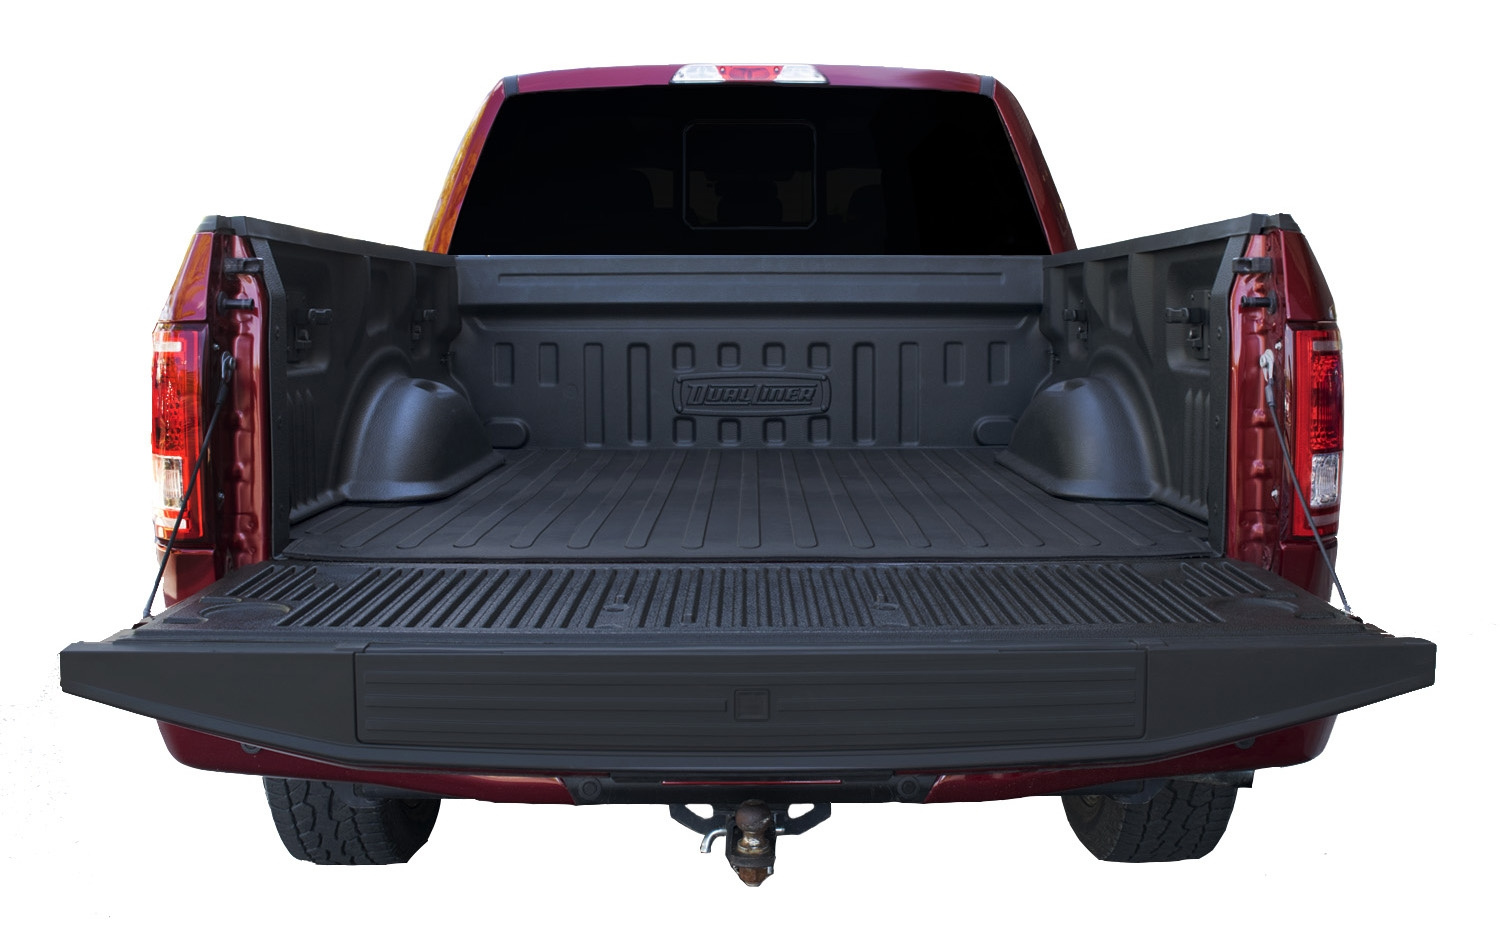 2020 ford f150 bed liner